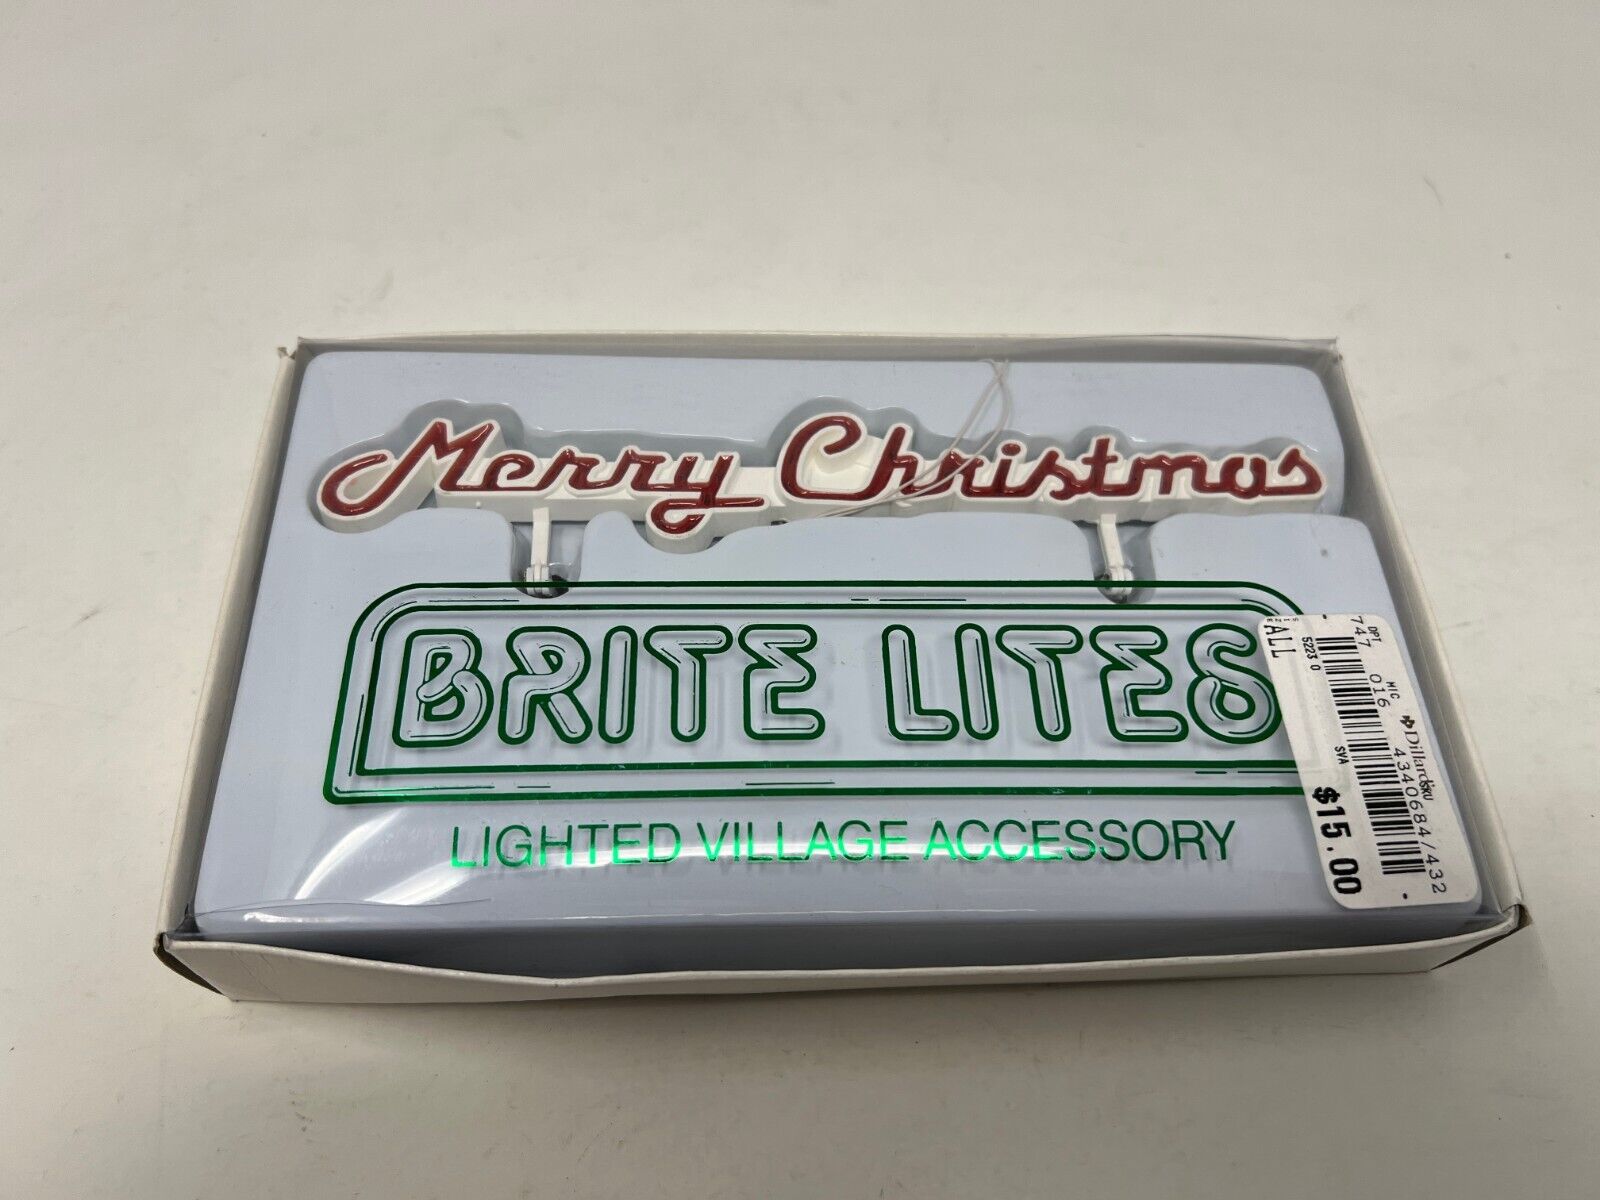 Department 56 Brite Lites Lighted Village Accessory Merry Christmas Sign